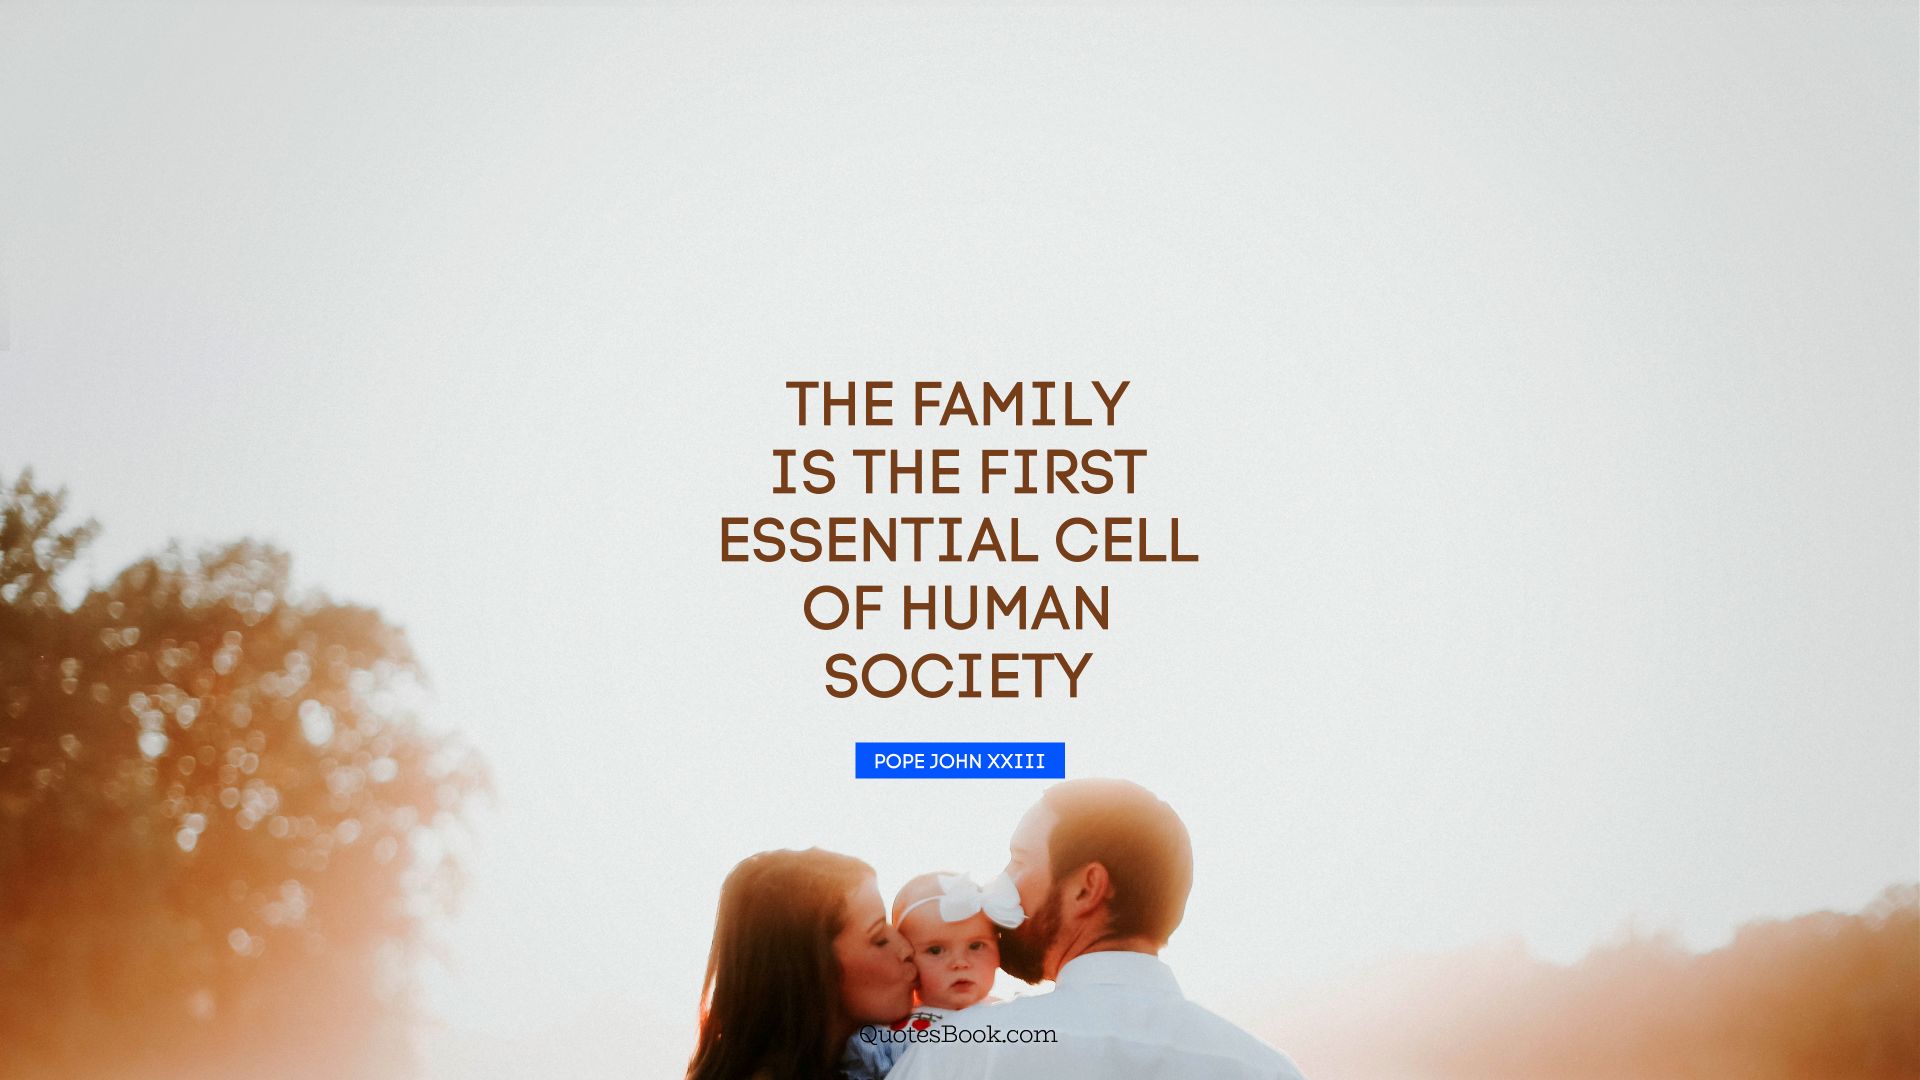 The family is the first essential cell of human society. - Quote by Pope John XXIII